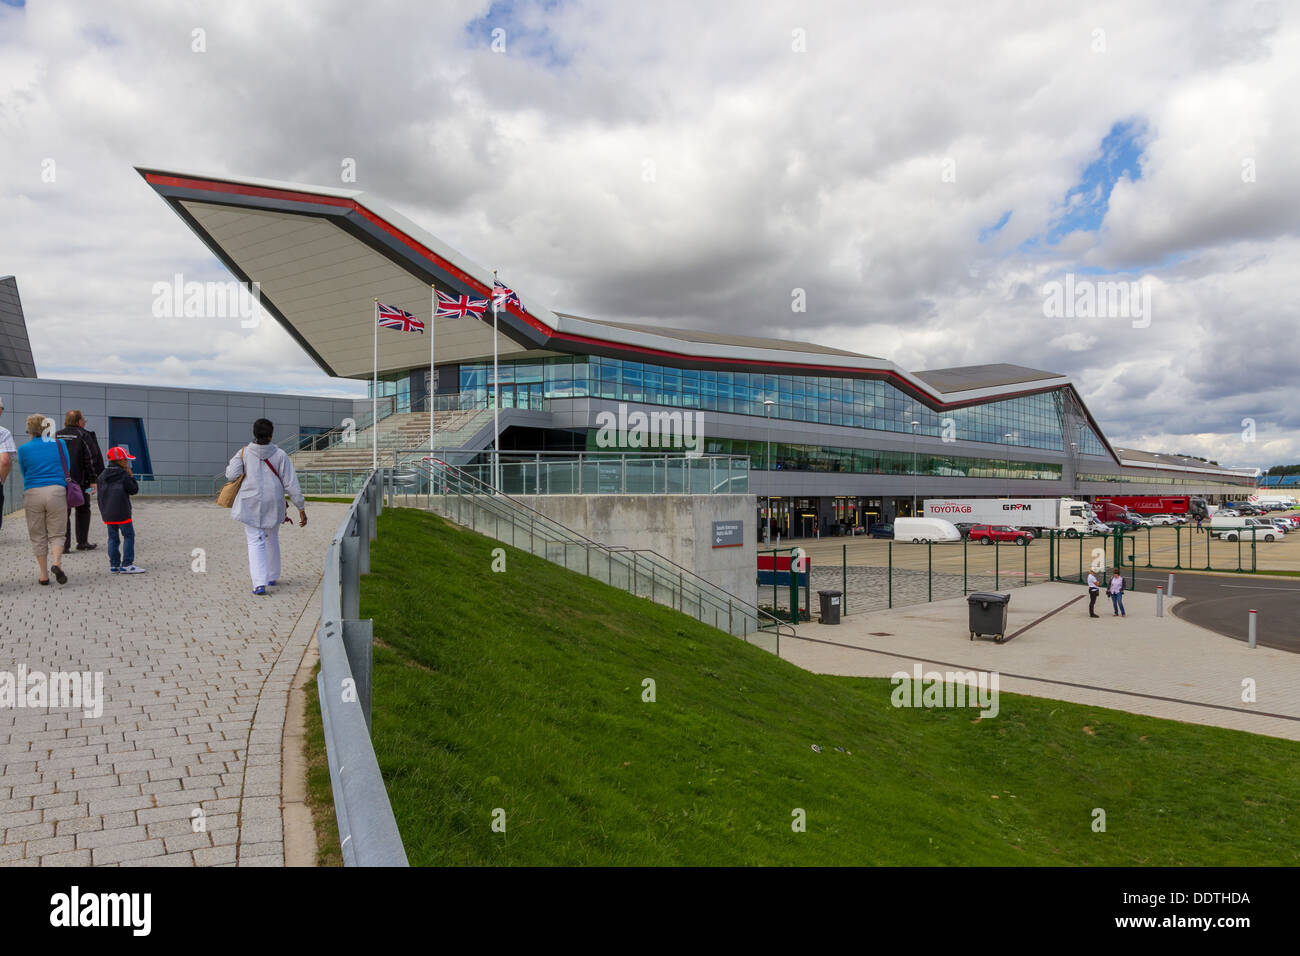 The Wing building at Silverstone Racing Circuit, housing pits, paddock, media and conferencing facilities. Stock Photo